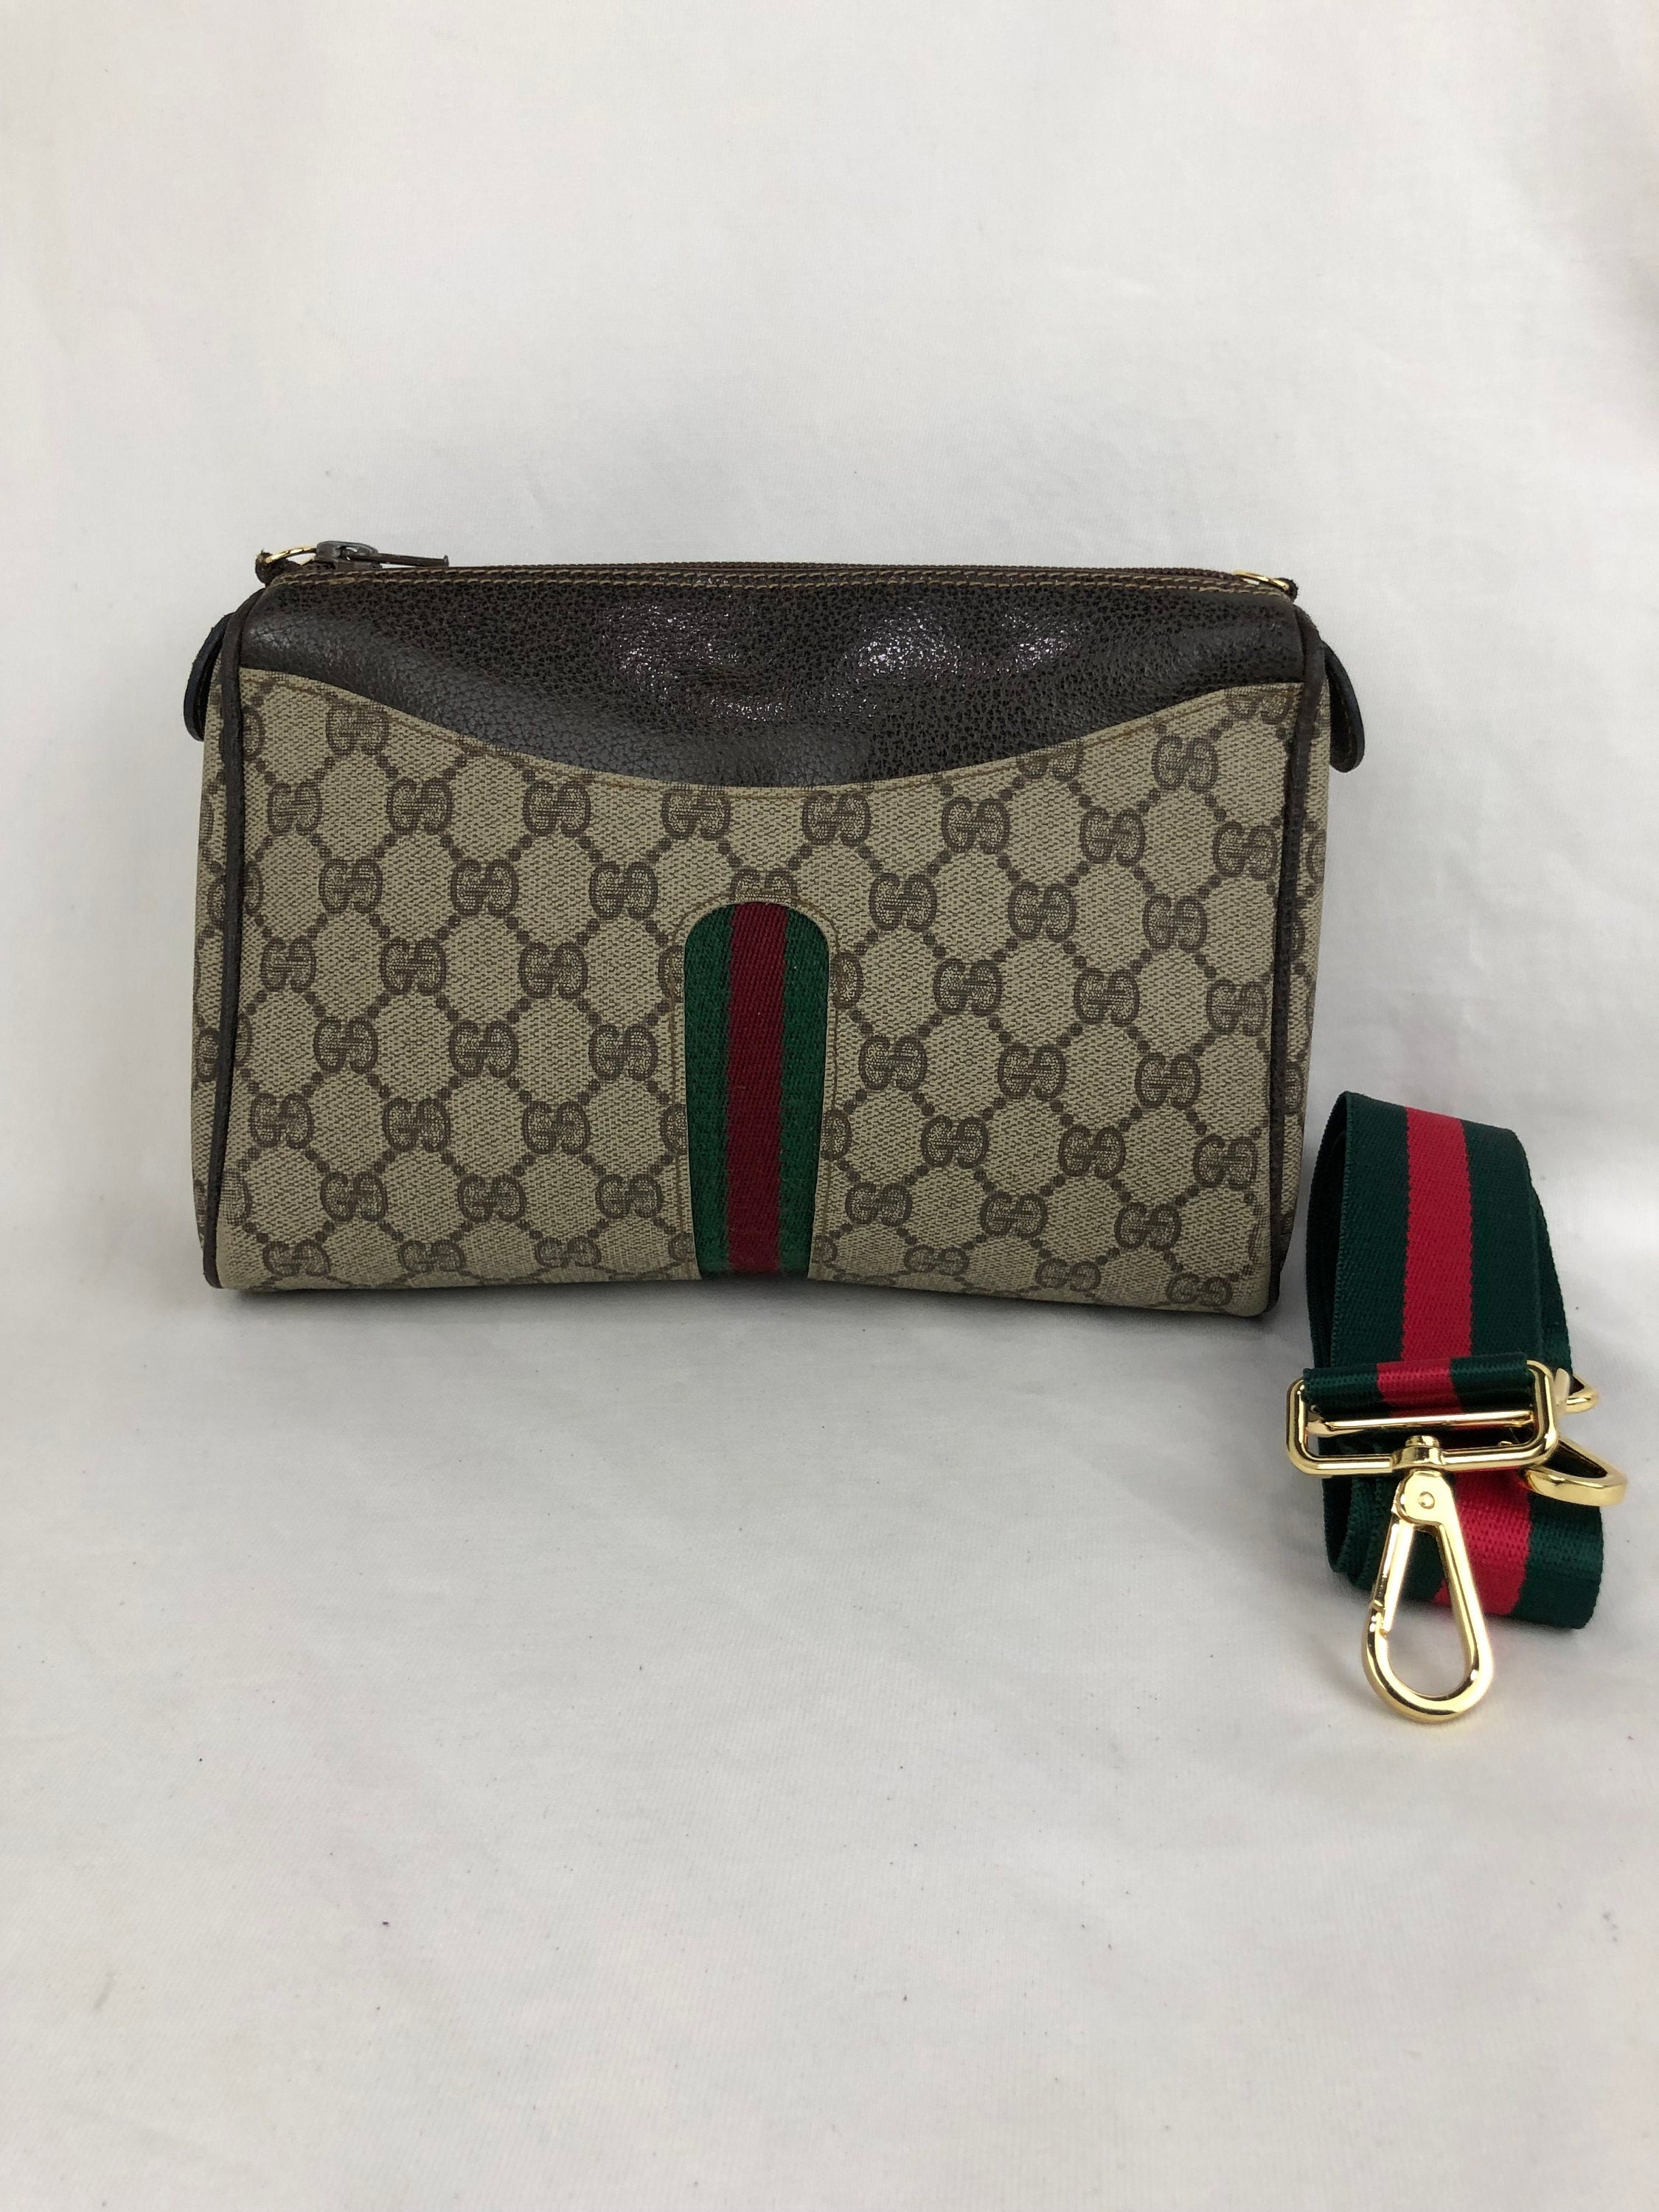 Gucci Pre-owned Women's Handbag - Black - One Size